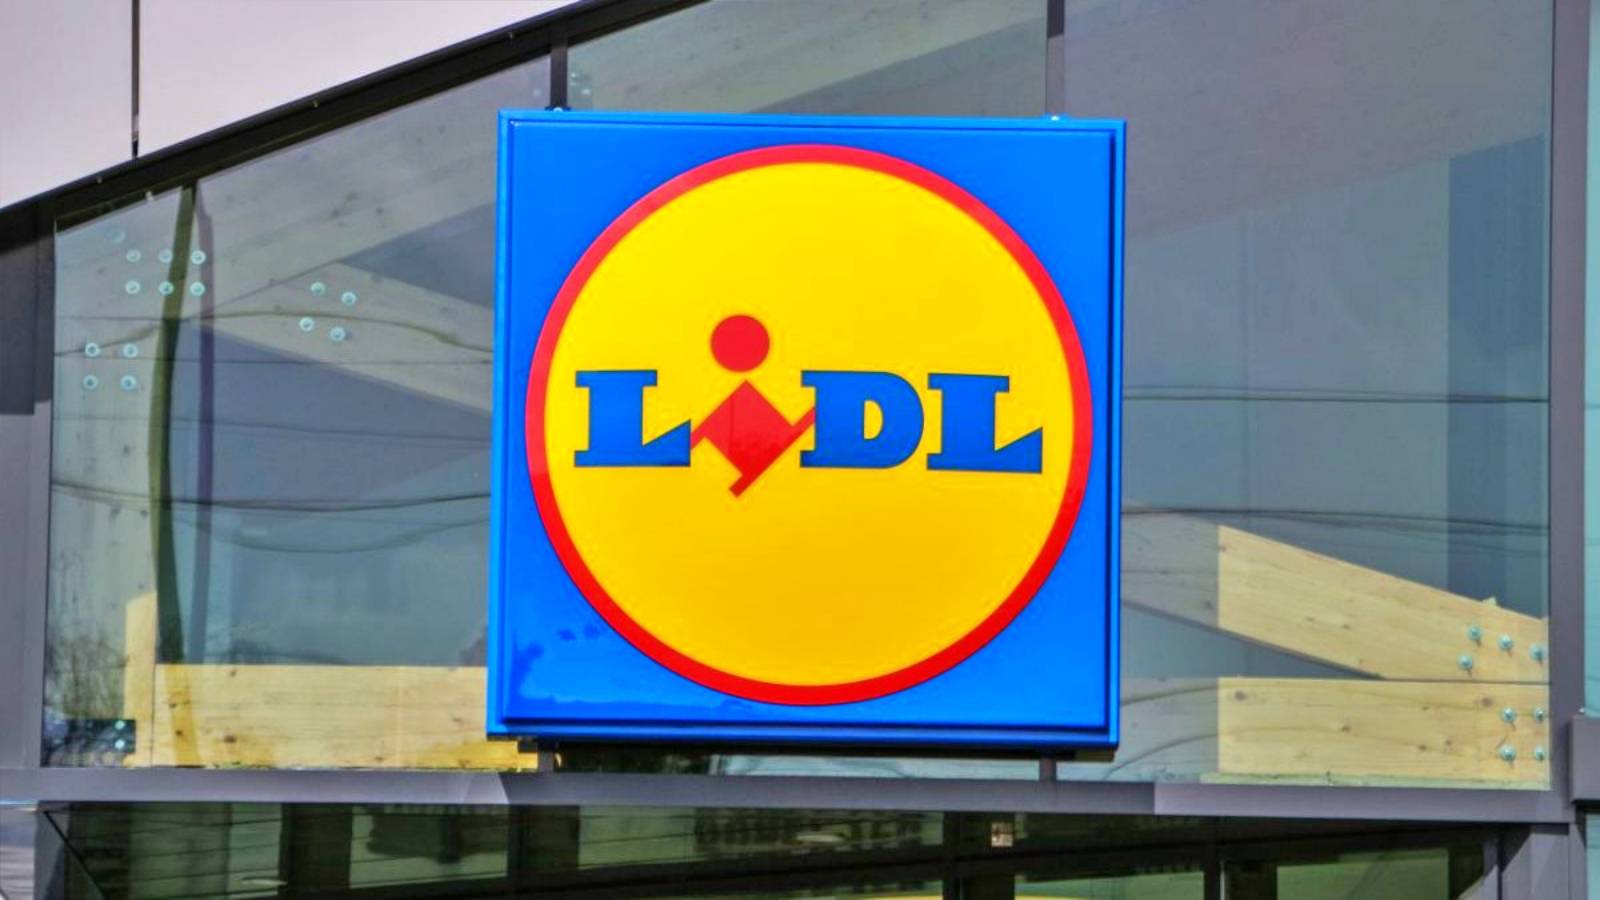 LIDL Romania Official Surprises FREE for Romania Customers